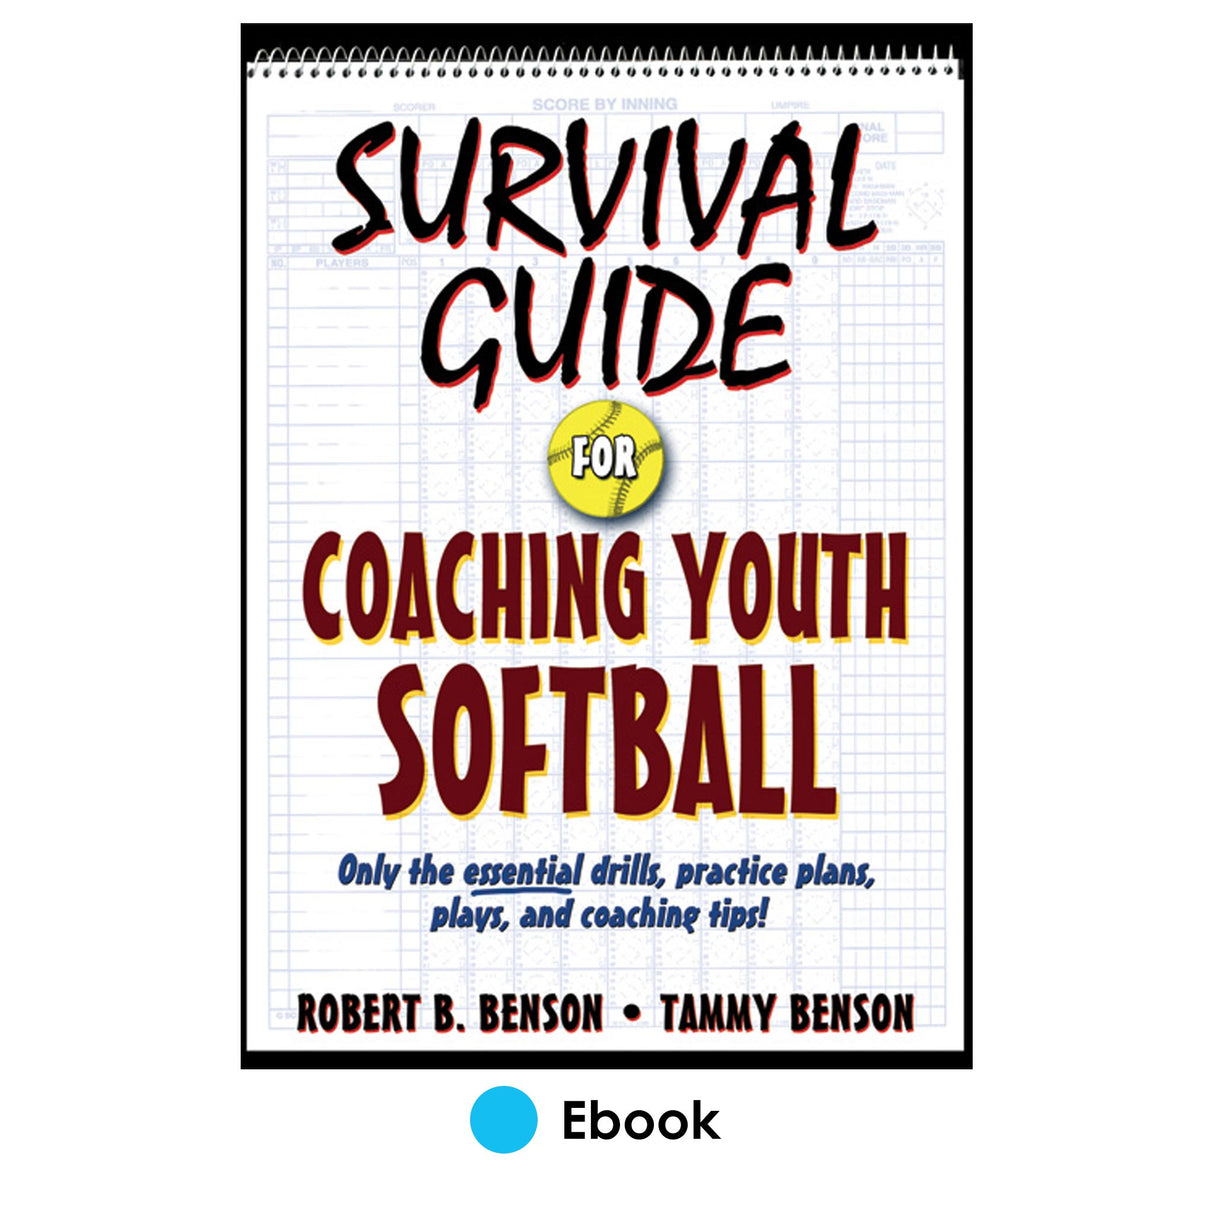 Survival Guide for Coaching Youth Softball PDF